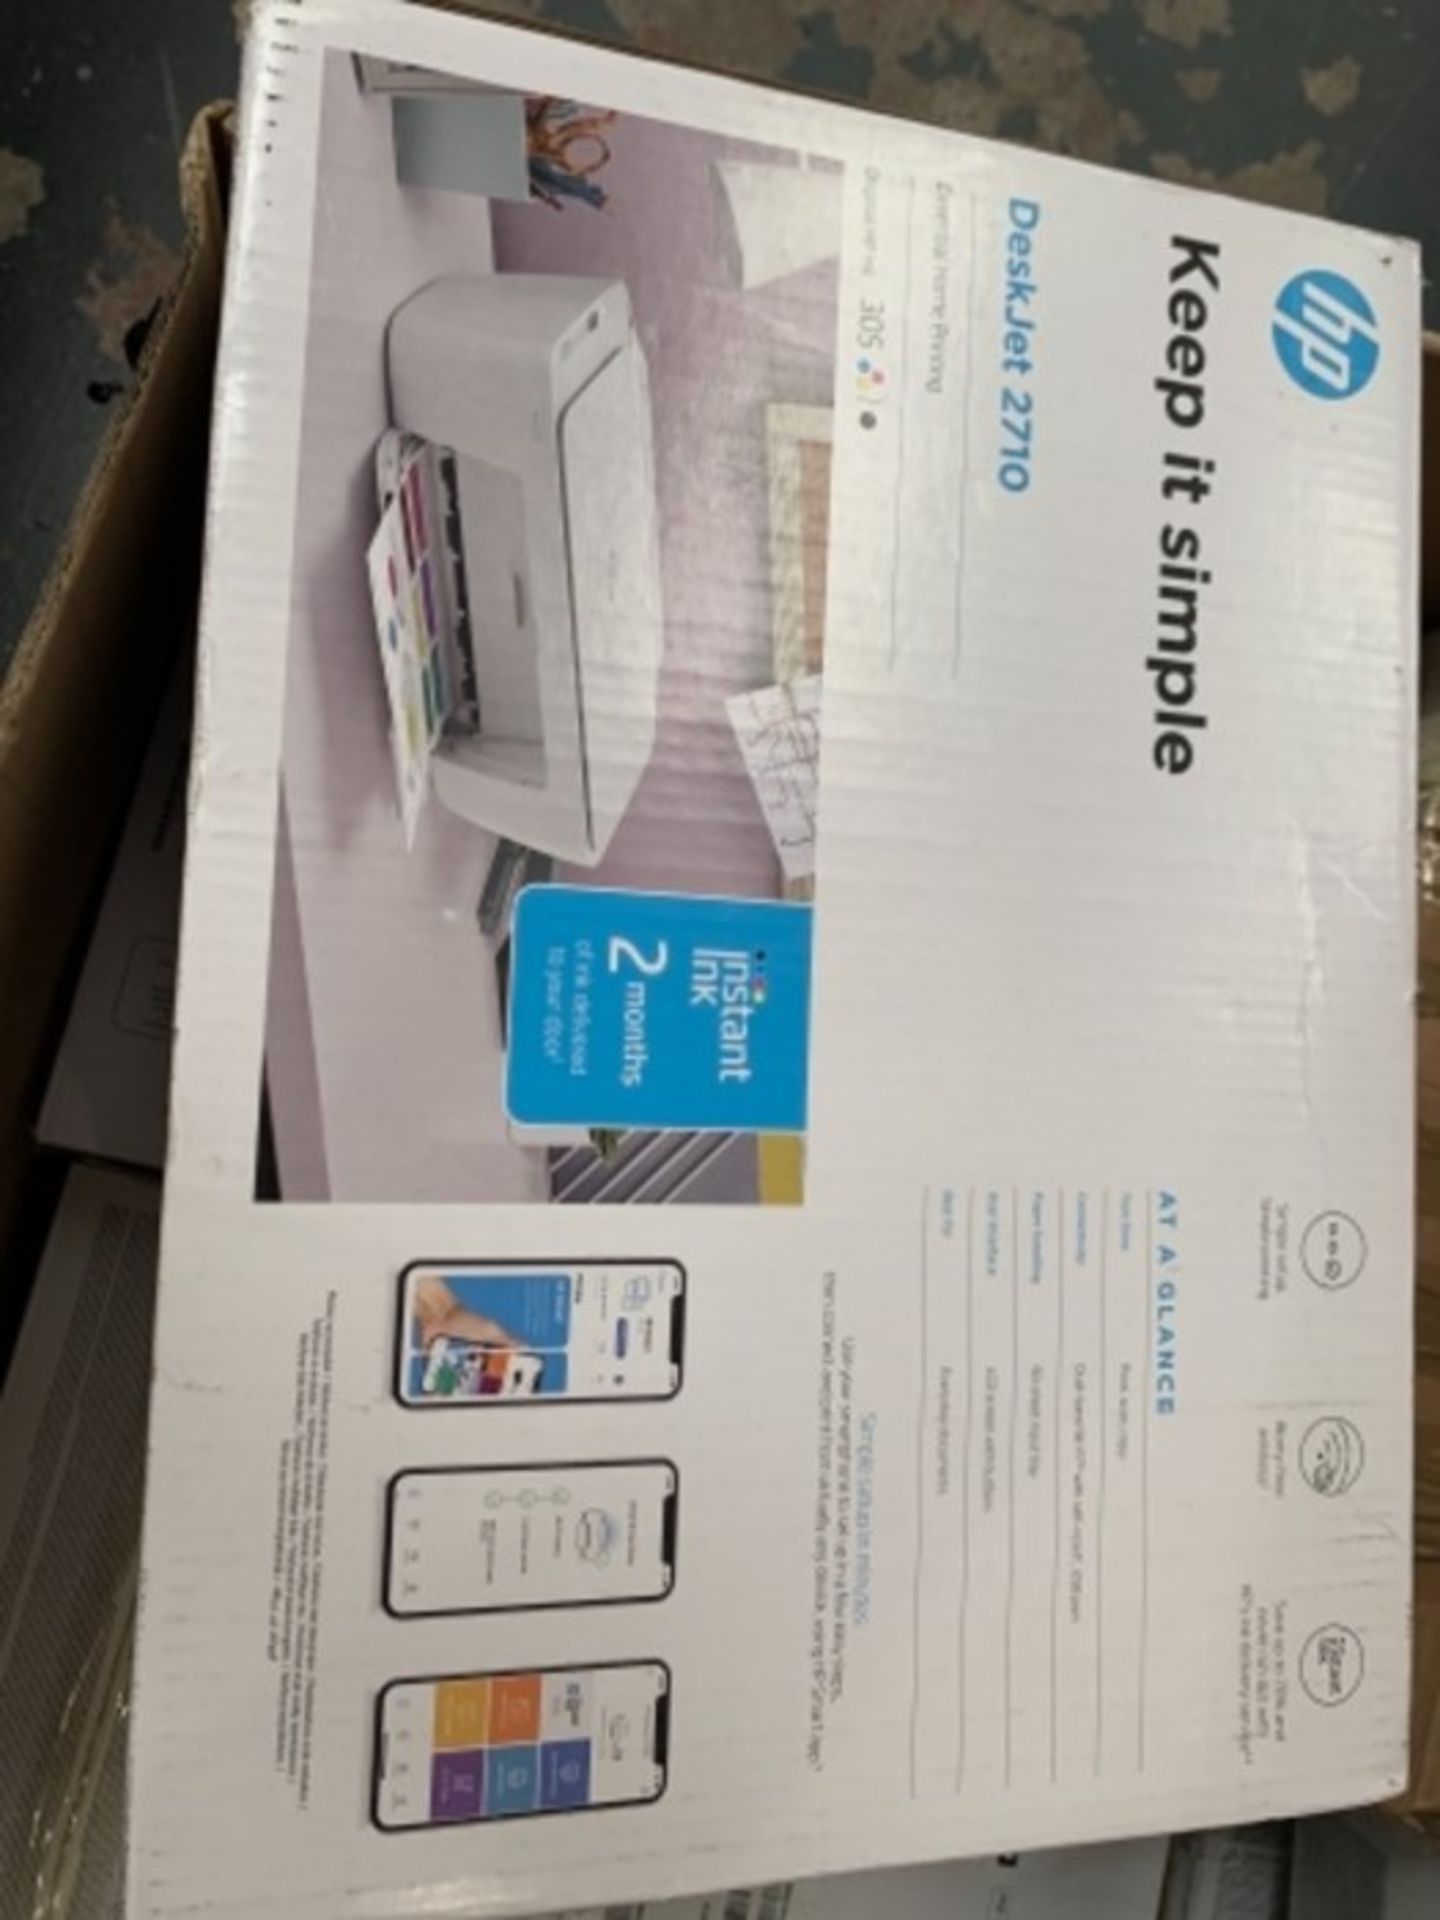 HP 5AR83B DeskJet 2710 All-in-One Printer with Wireless Printing, Instant Ink with 2 M - Image 2 of 3